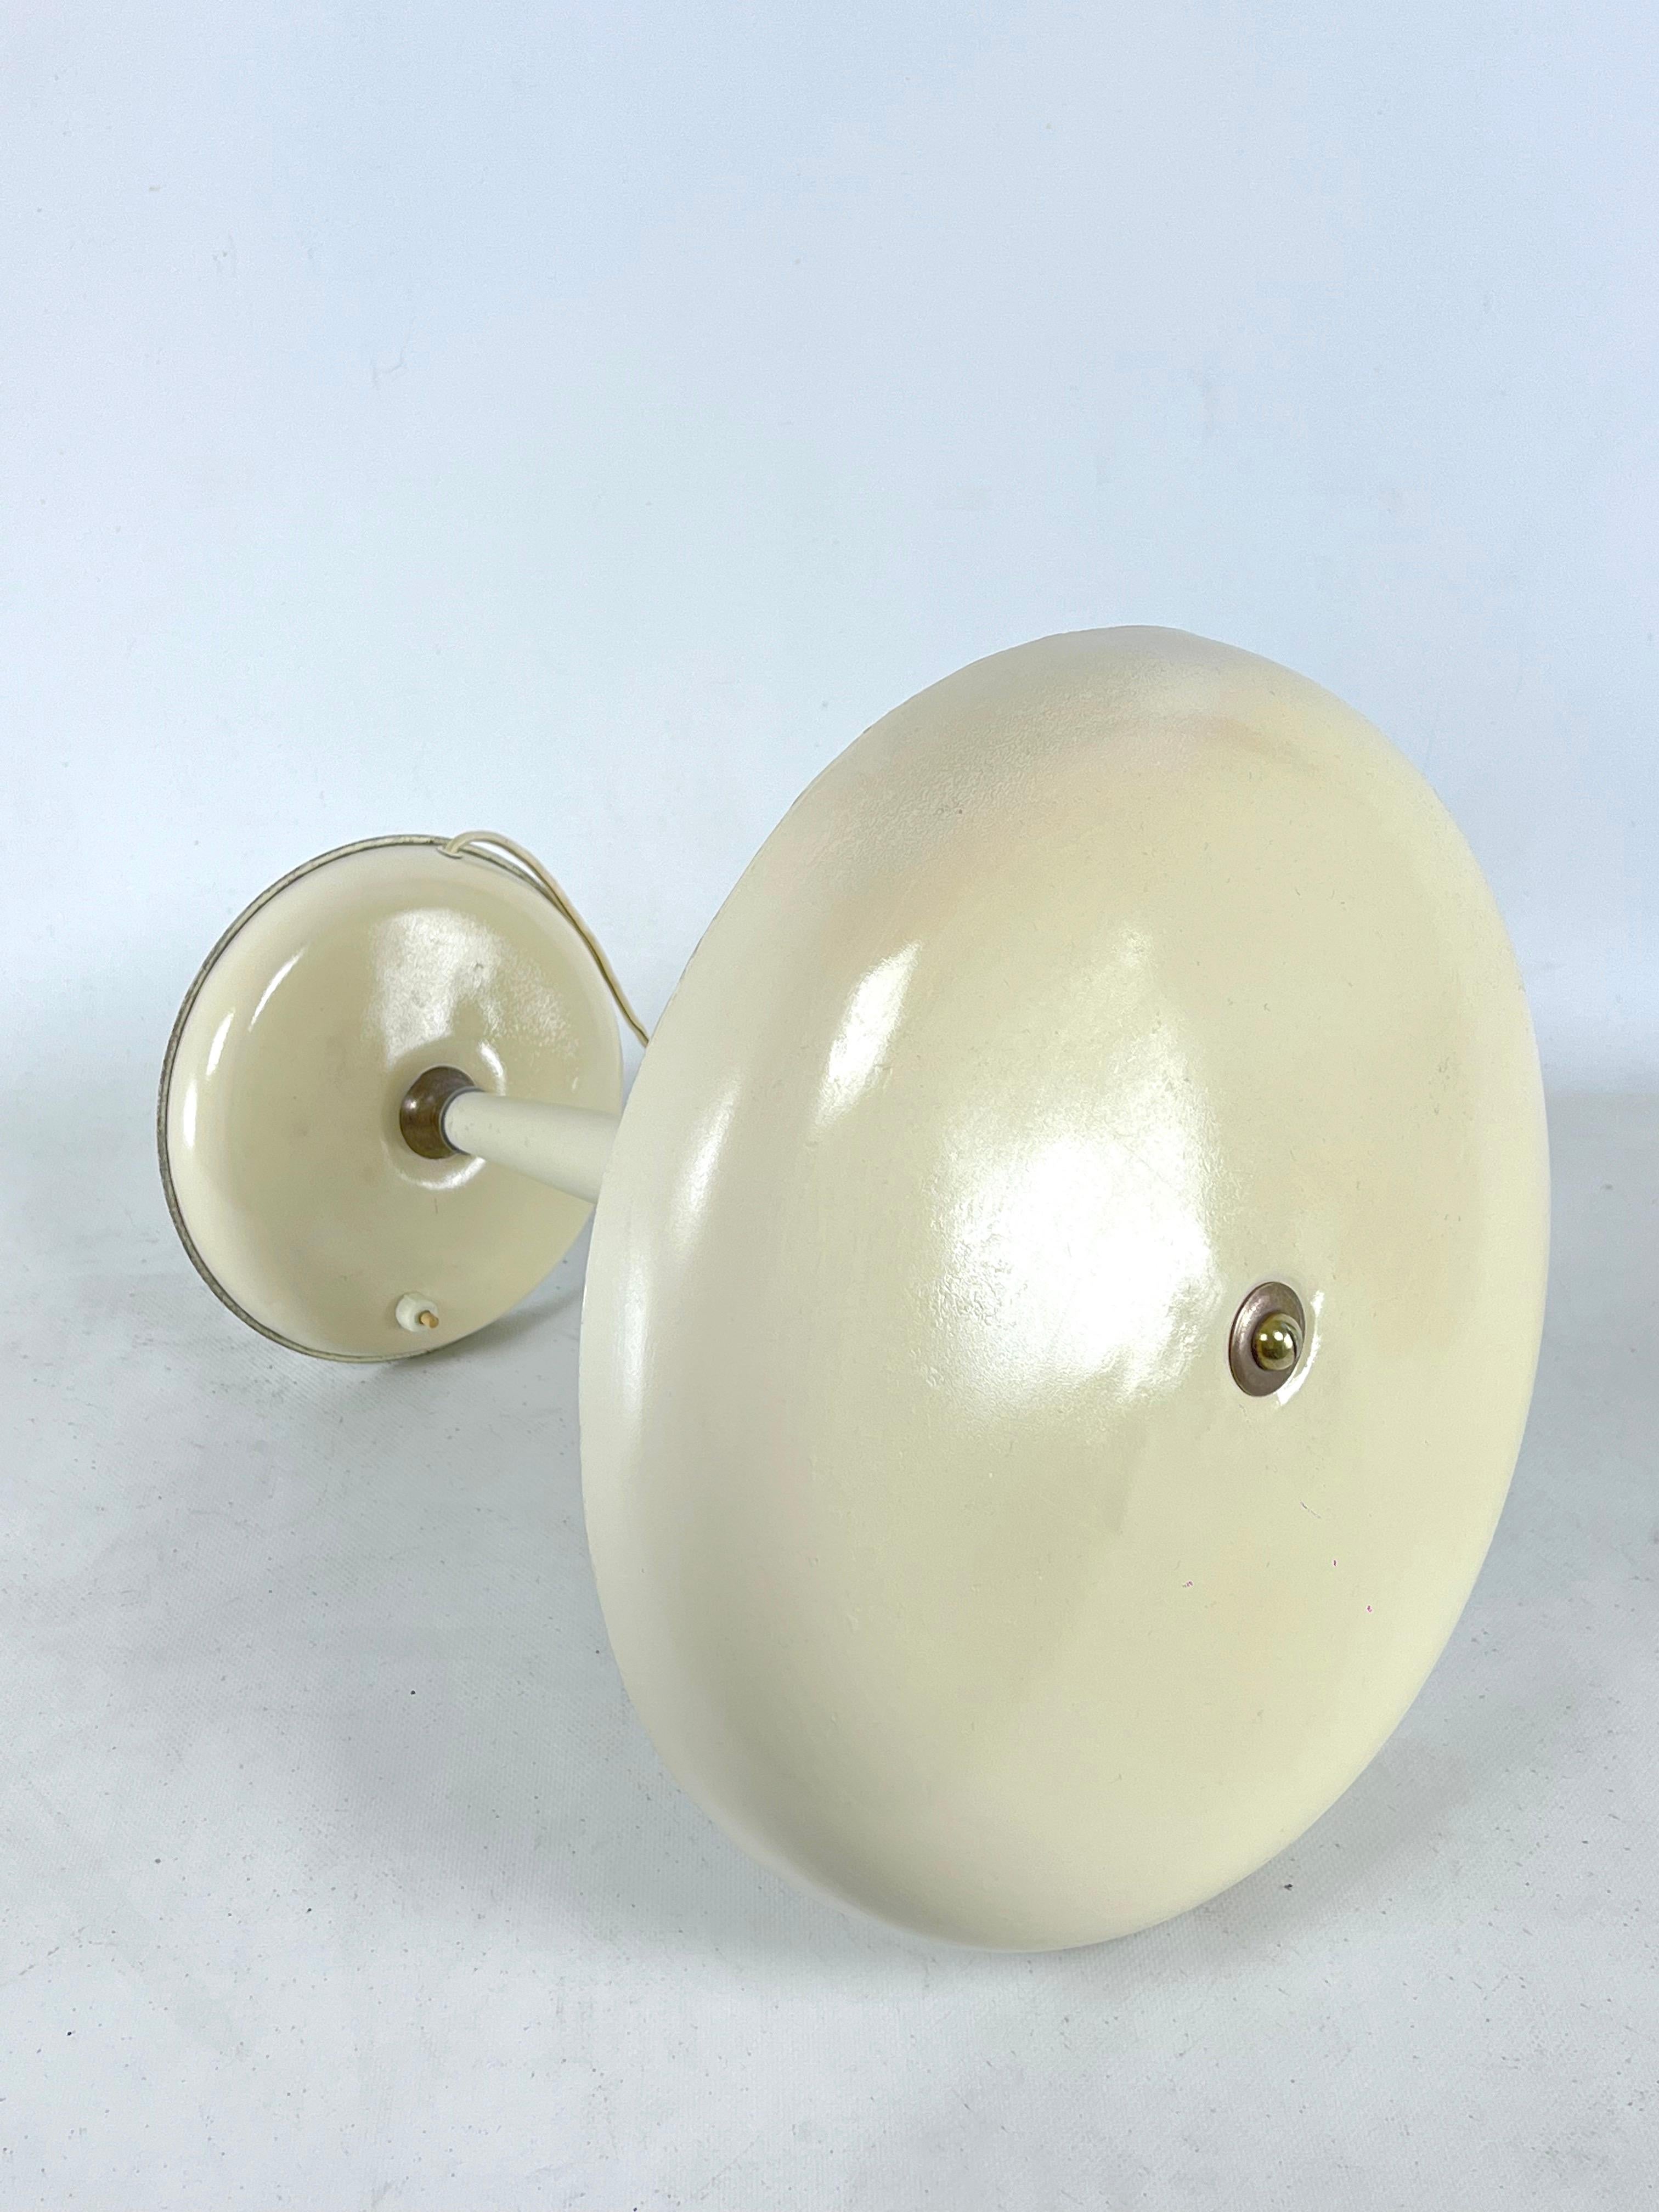 Midcentury Italian Ministerial Desk Lamp in Brass and Ivory Lacquer, Italy, 1950 For Sale 9